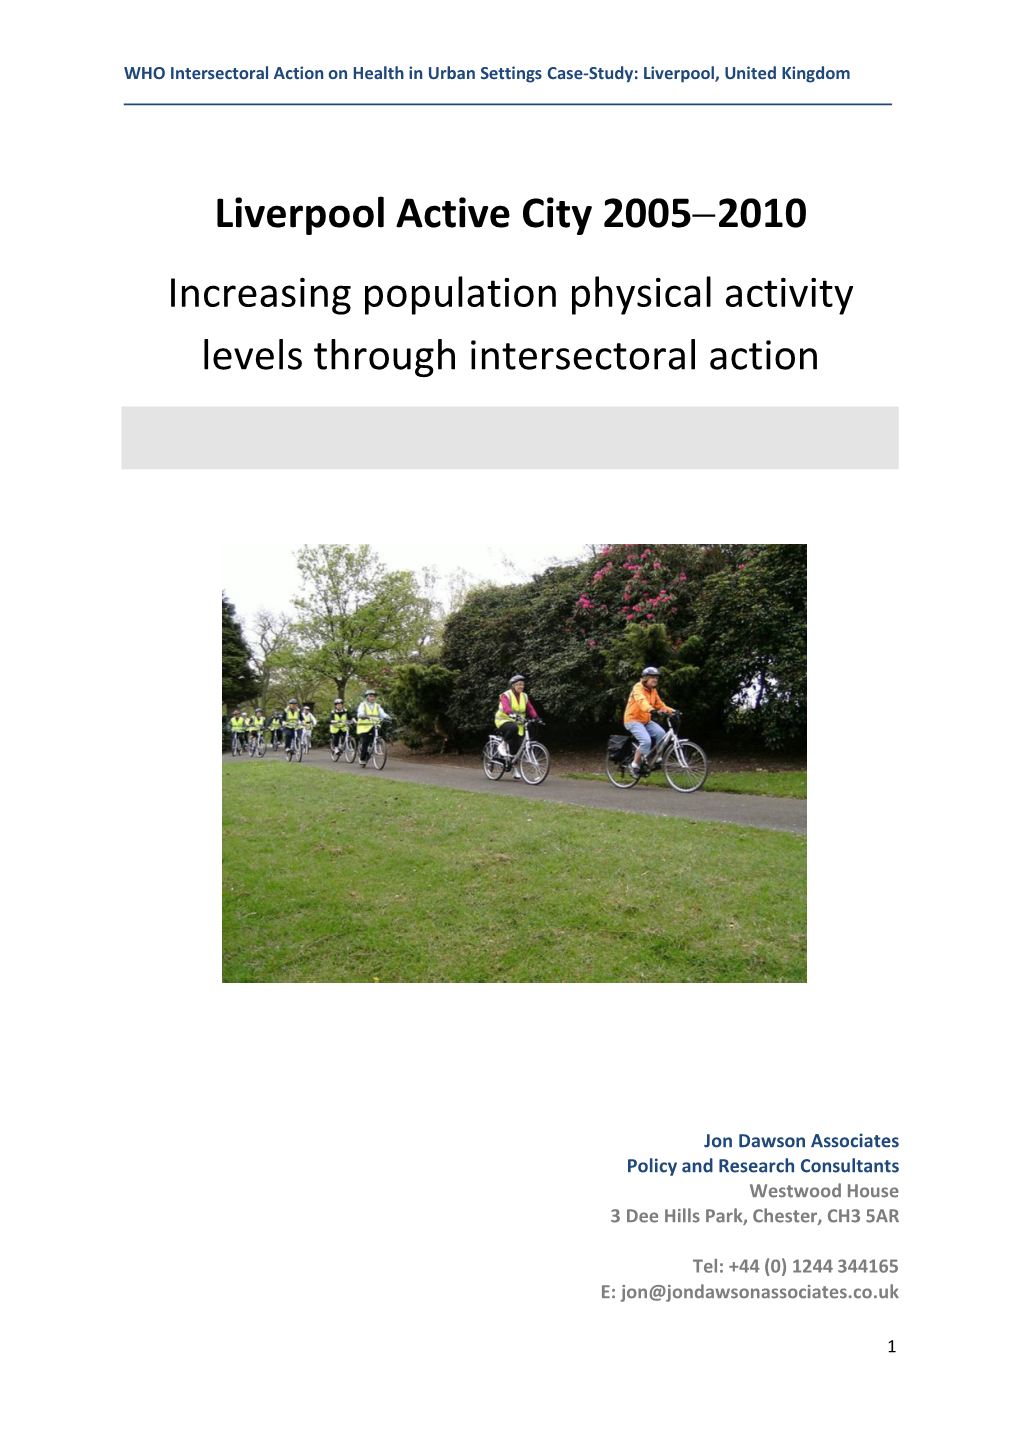 Liverpool Active City 2005-2010 Increasing Population Physical